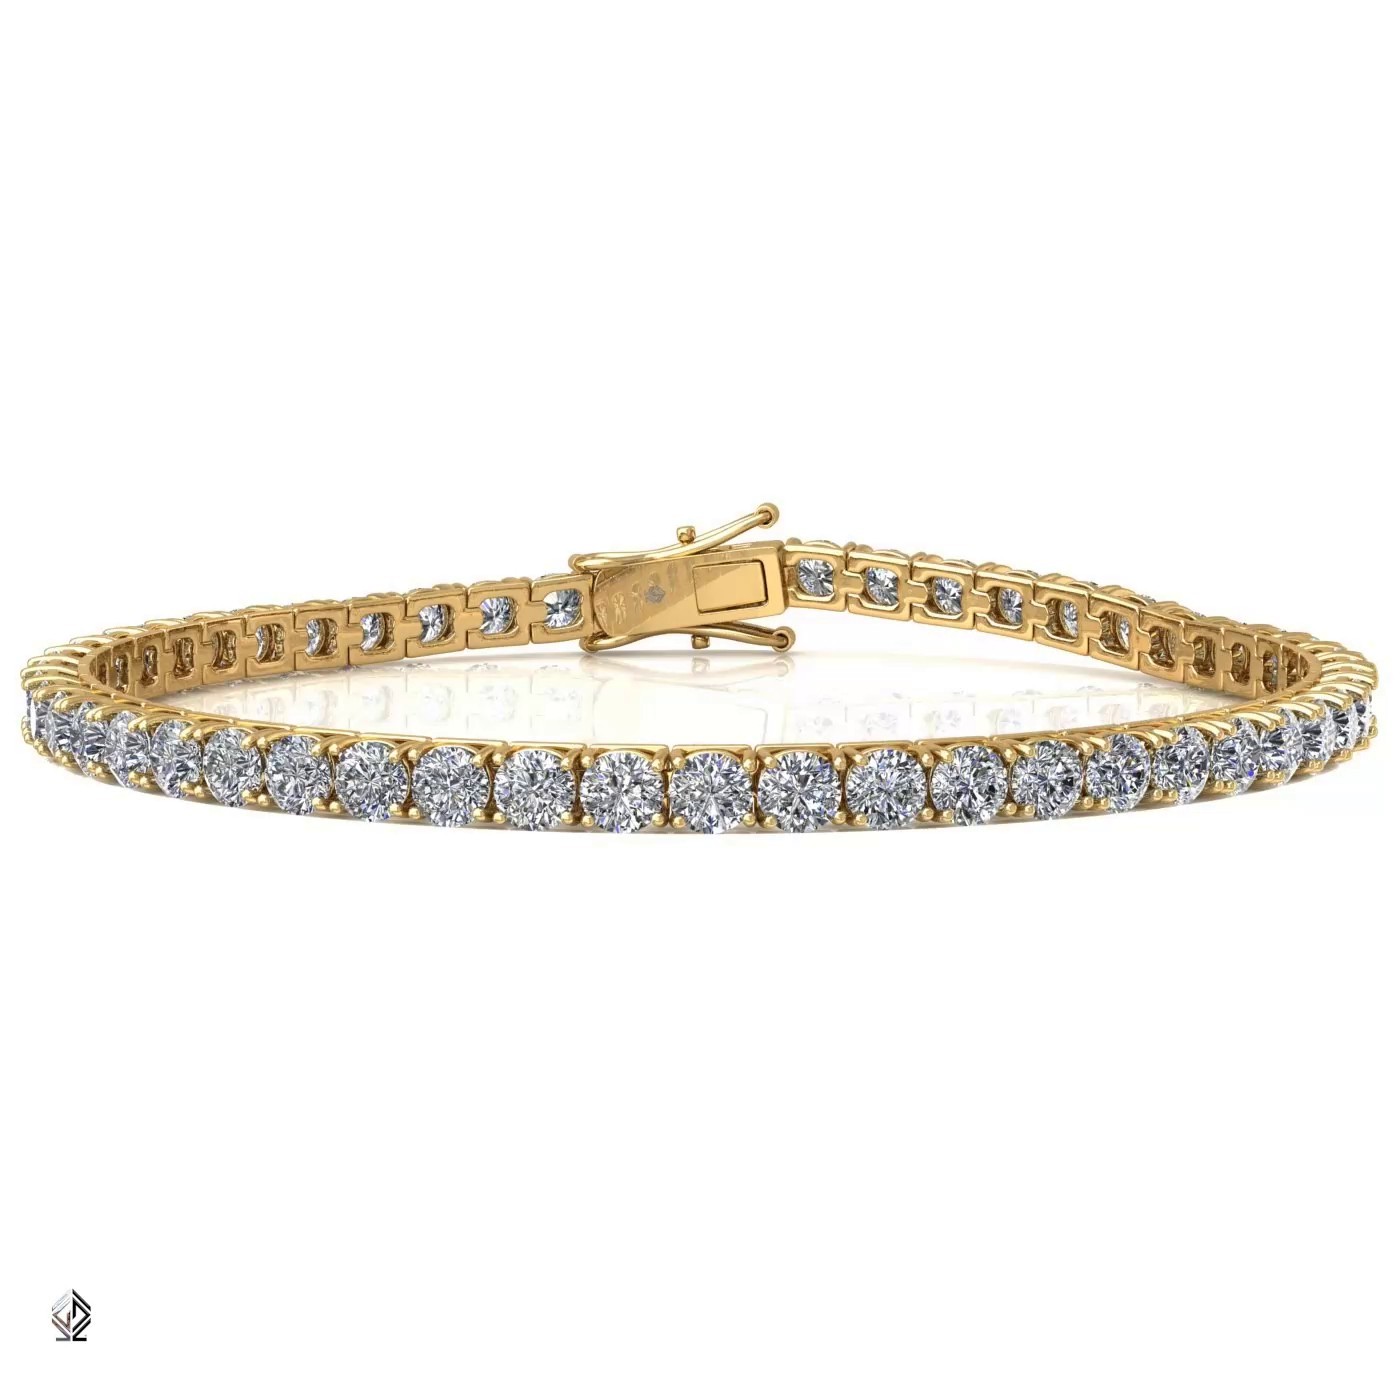 18k yellow gold 4.2mm 4 prong round shape diamond tennis bracelet in square setting Photos & images